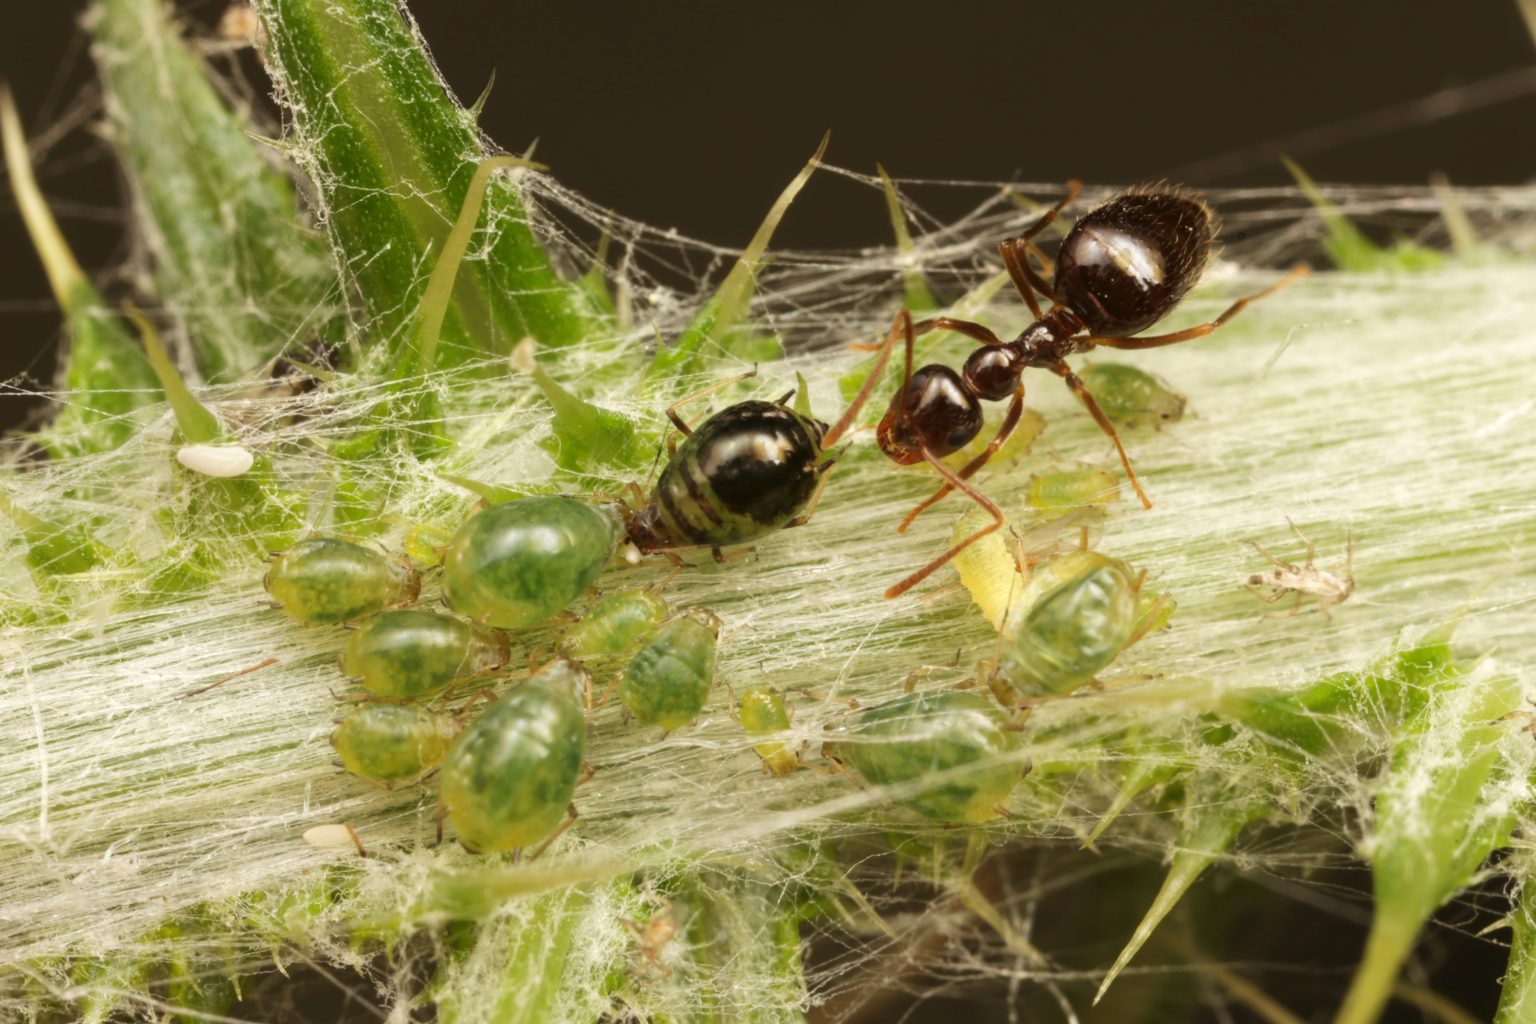 A Prenolepis (winter) ant tending aphids